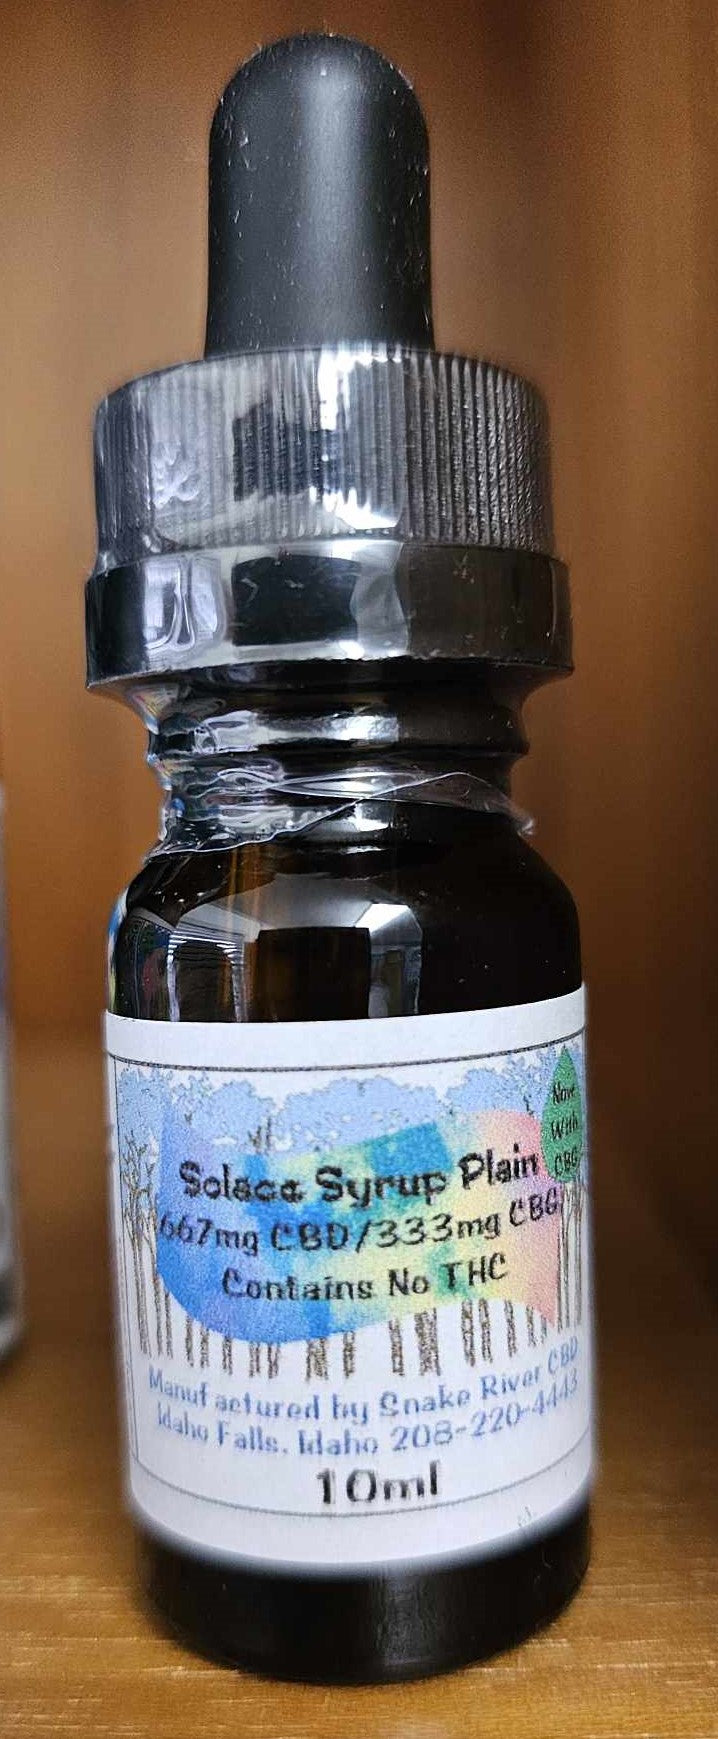 Solace Syrup